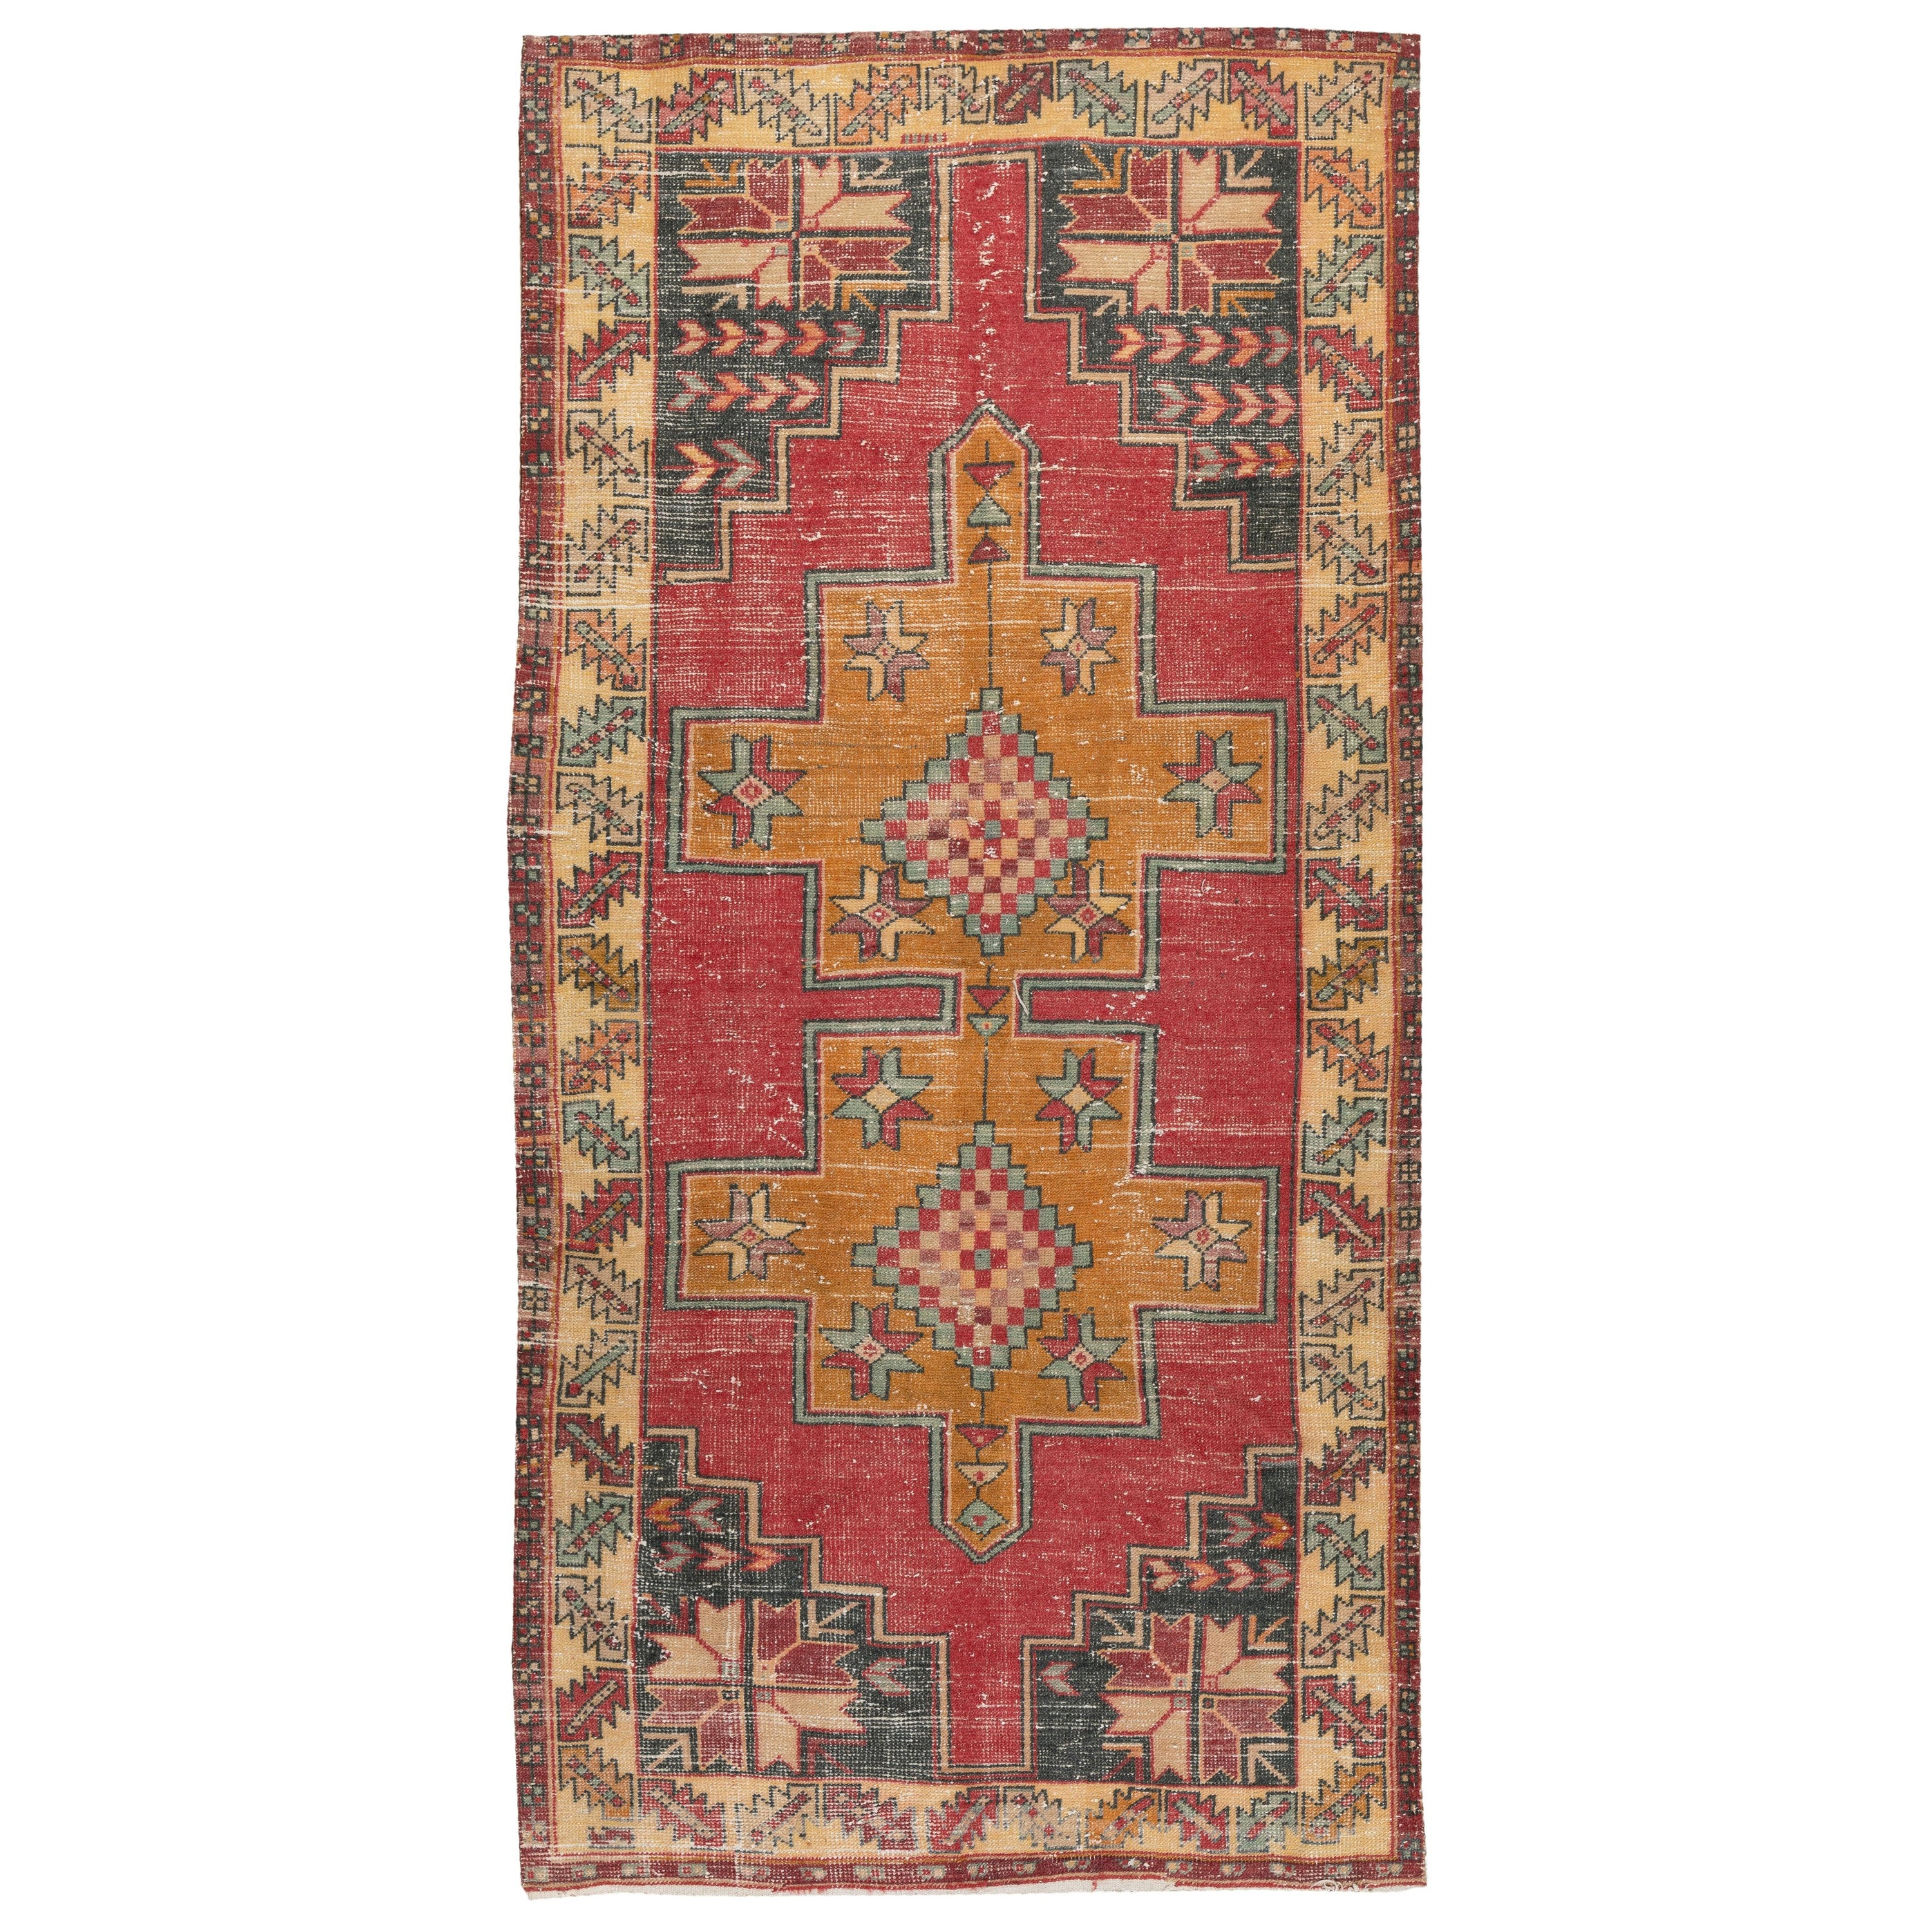 3.8x8 Ft Mid Century Hand-Knotted Turkish Oriental Rug in Vibrant and Warm Color